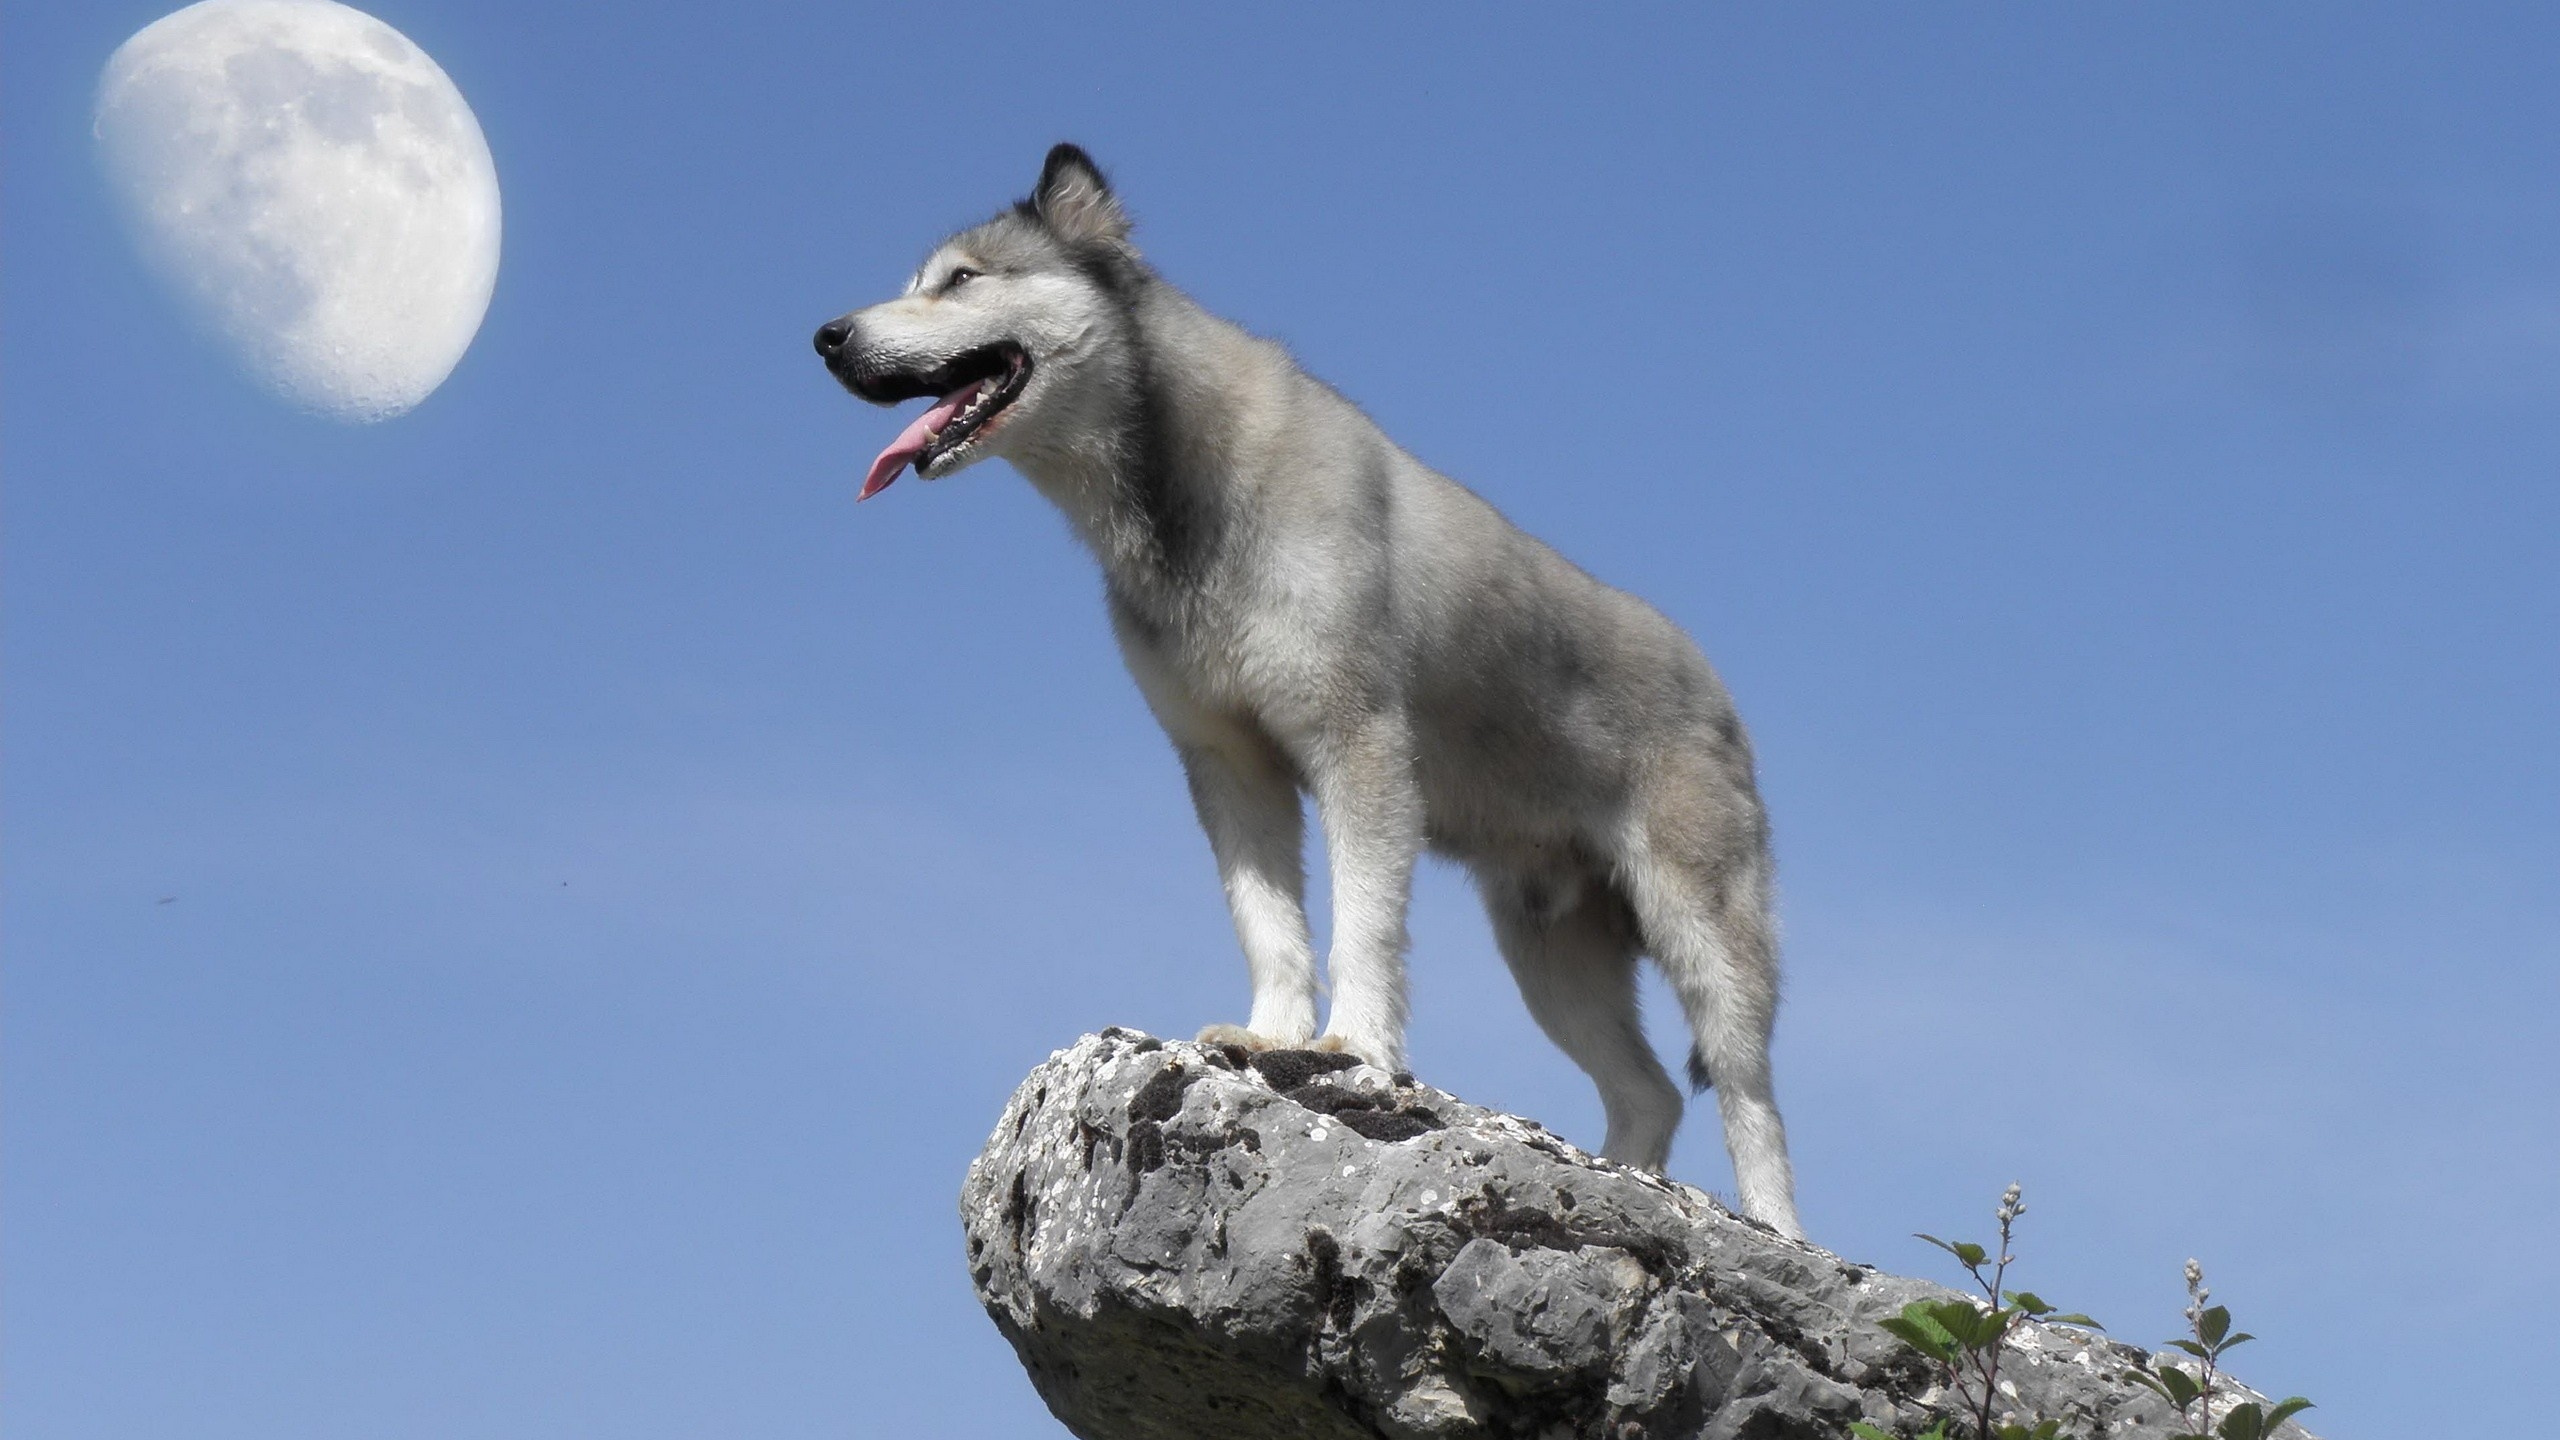 White and Gray Siberian Husky on Gray Rock During Daytime. Wallpaper in 2560x1440 Resolution